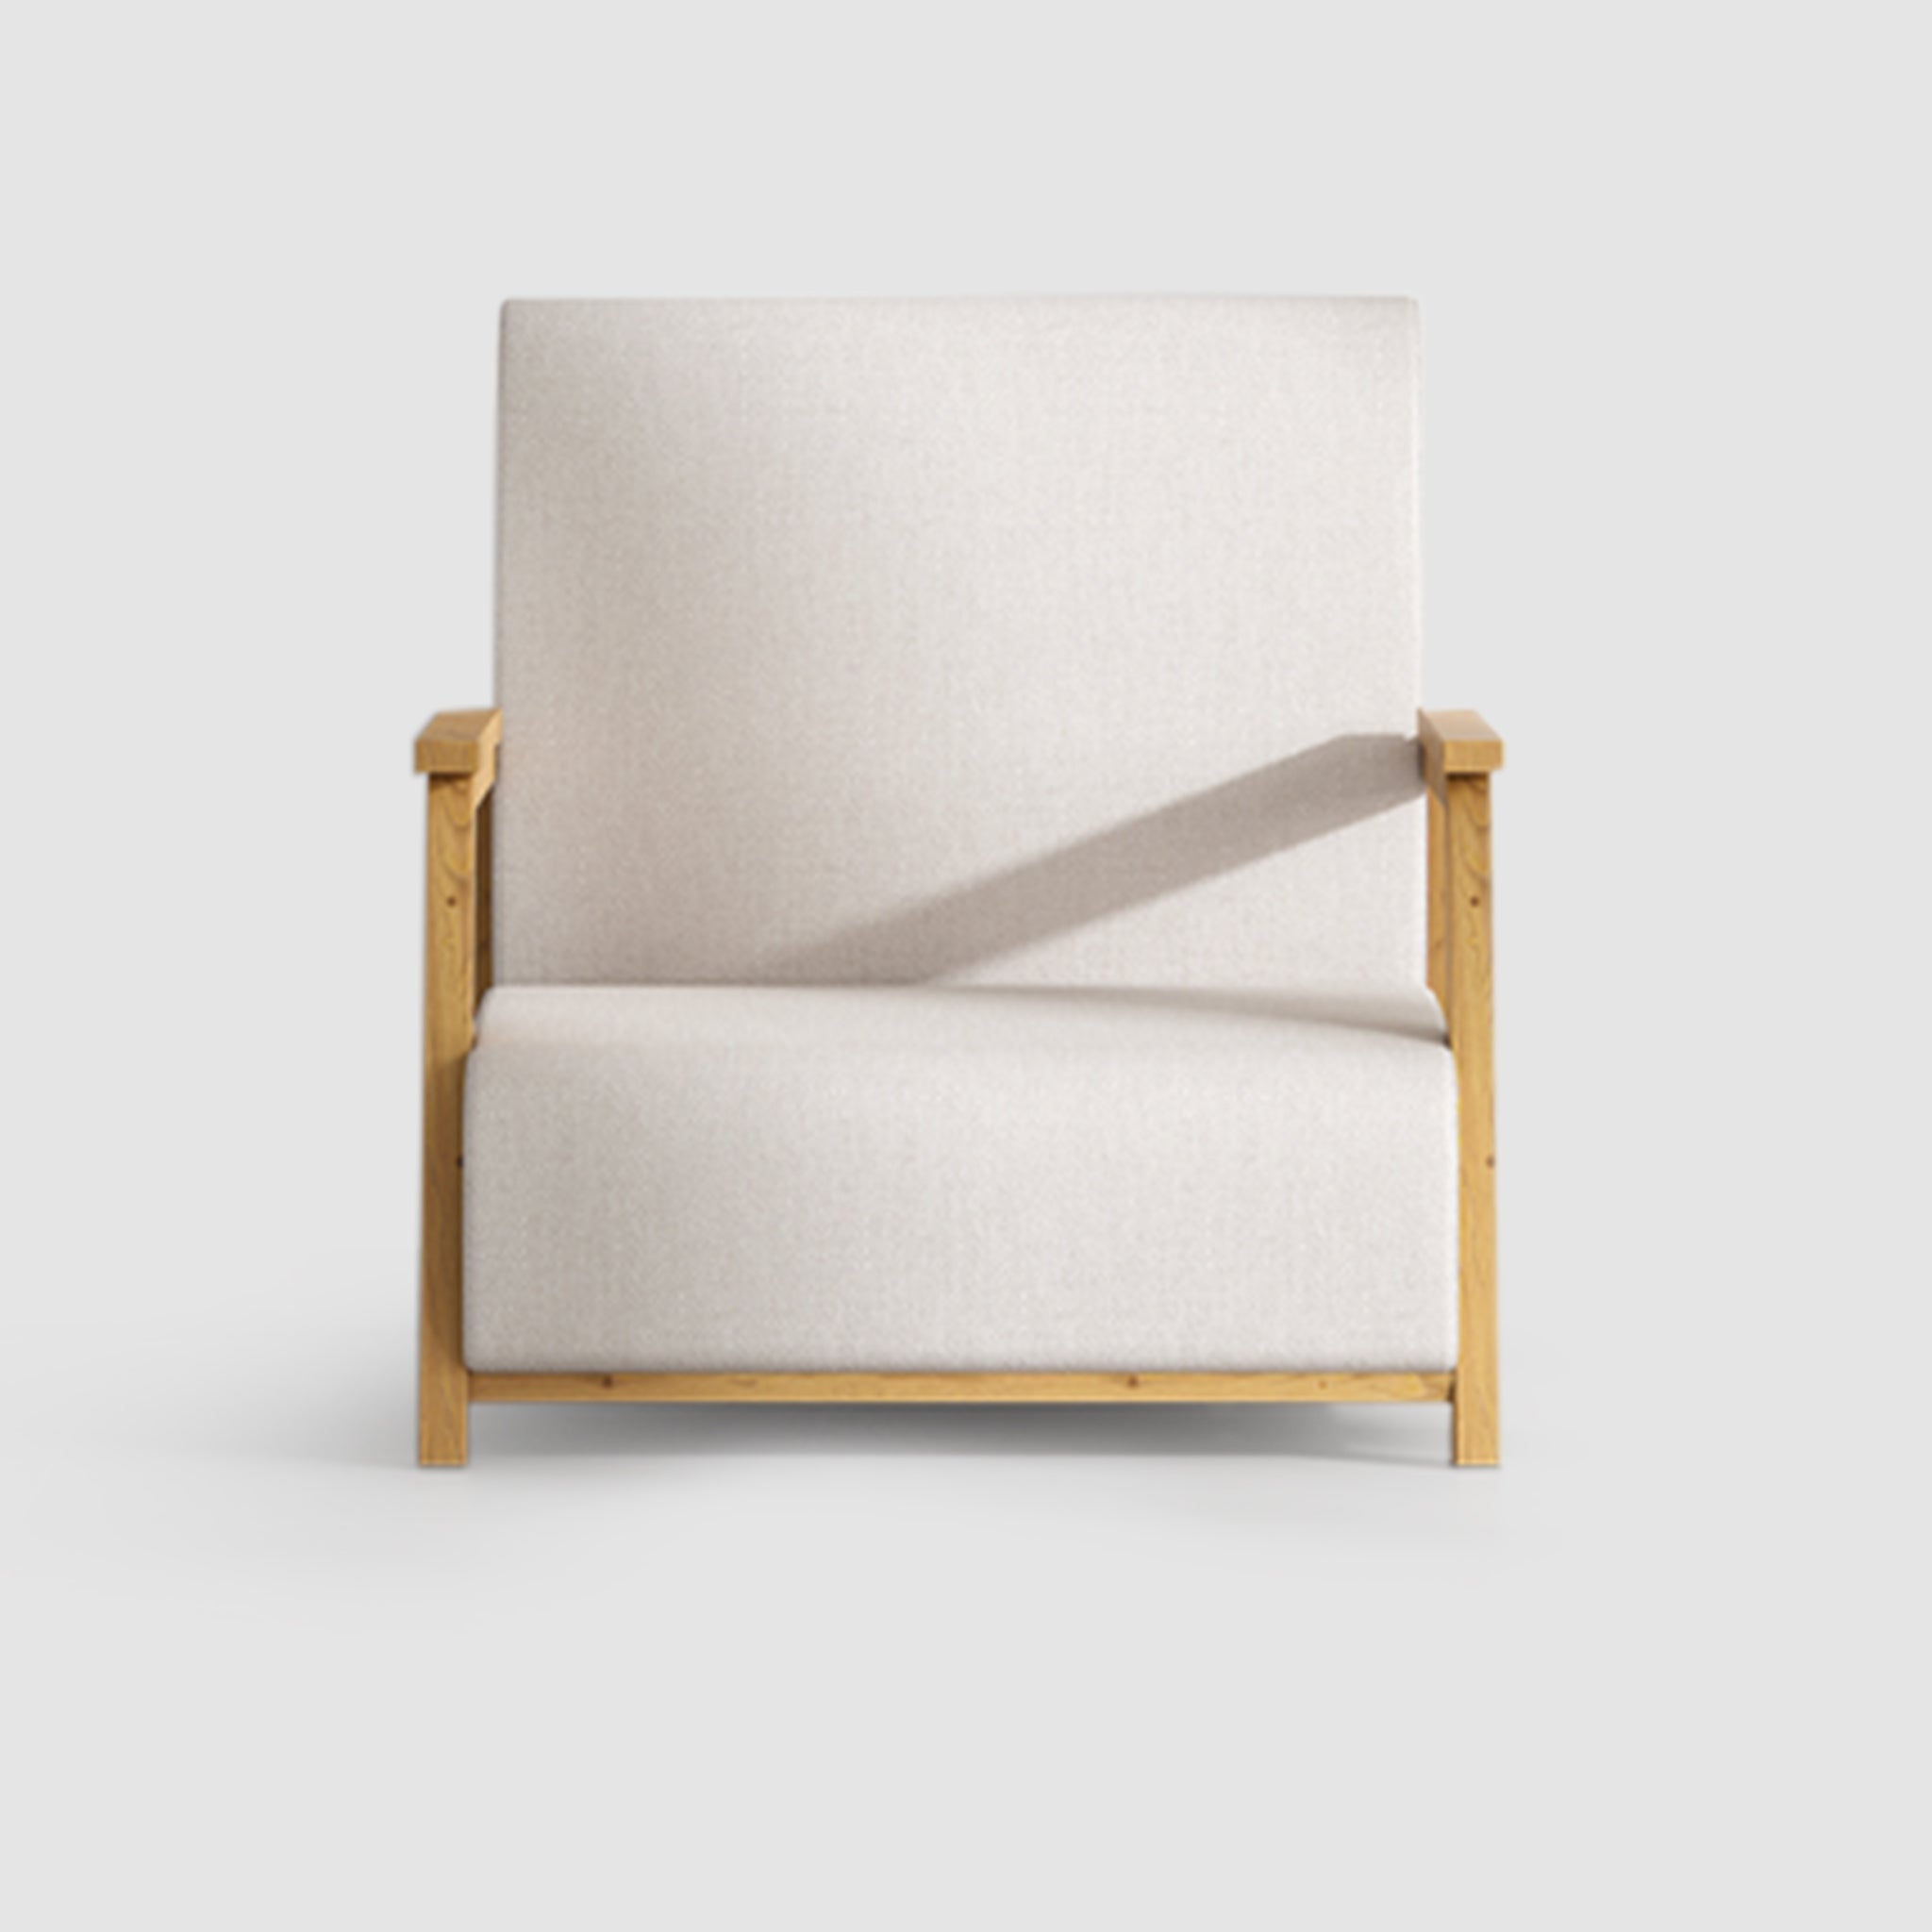 Front-facing view of The Dixon Arm Accent Chair, featuring clean lines, light beige upholstery, and sturdy natural wooden armrests.